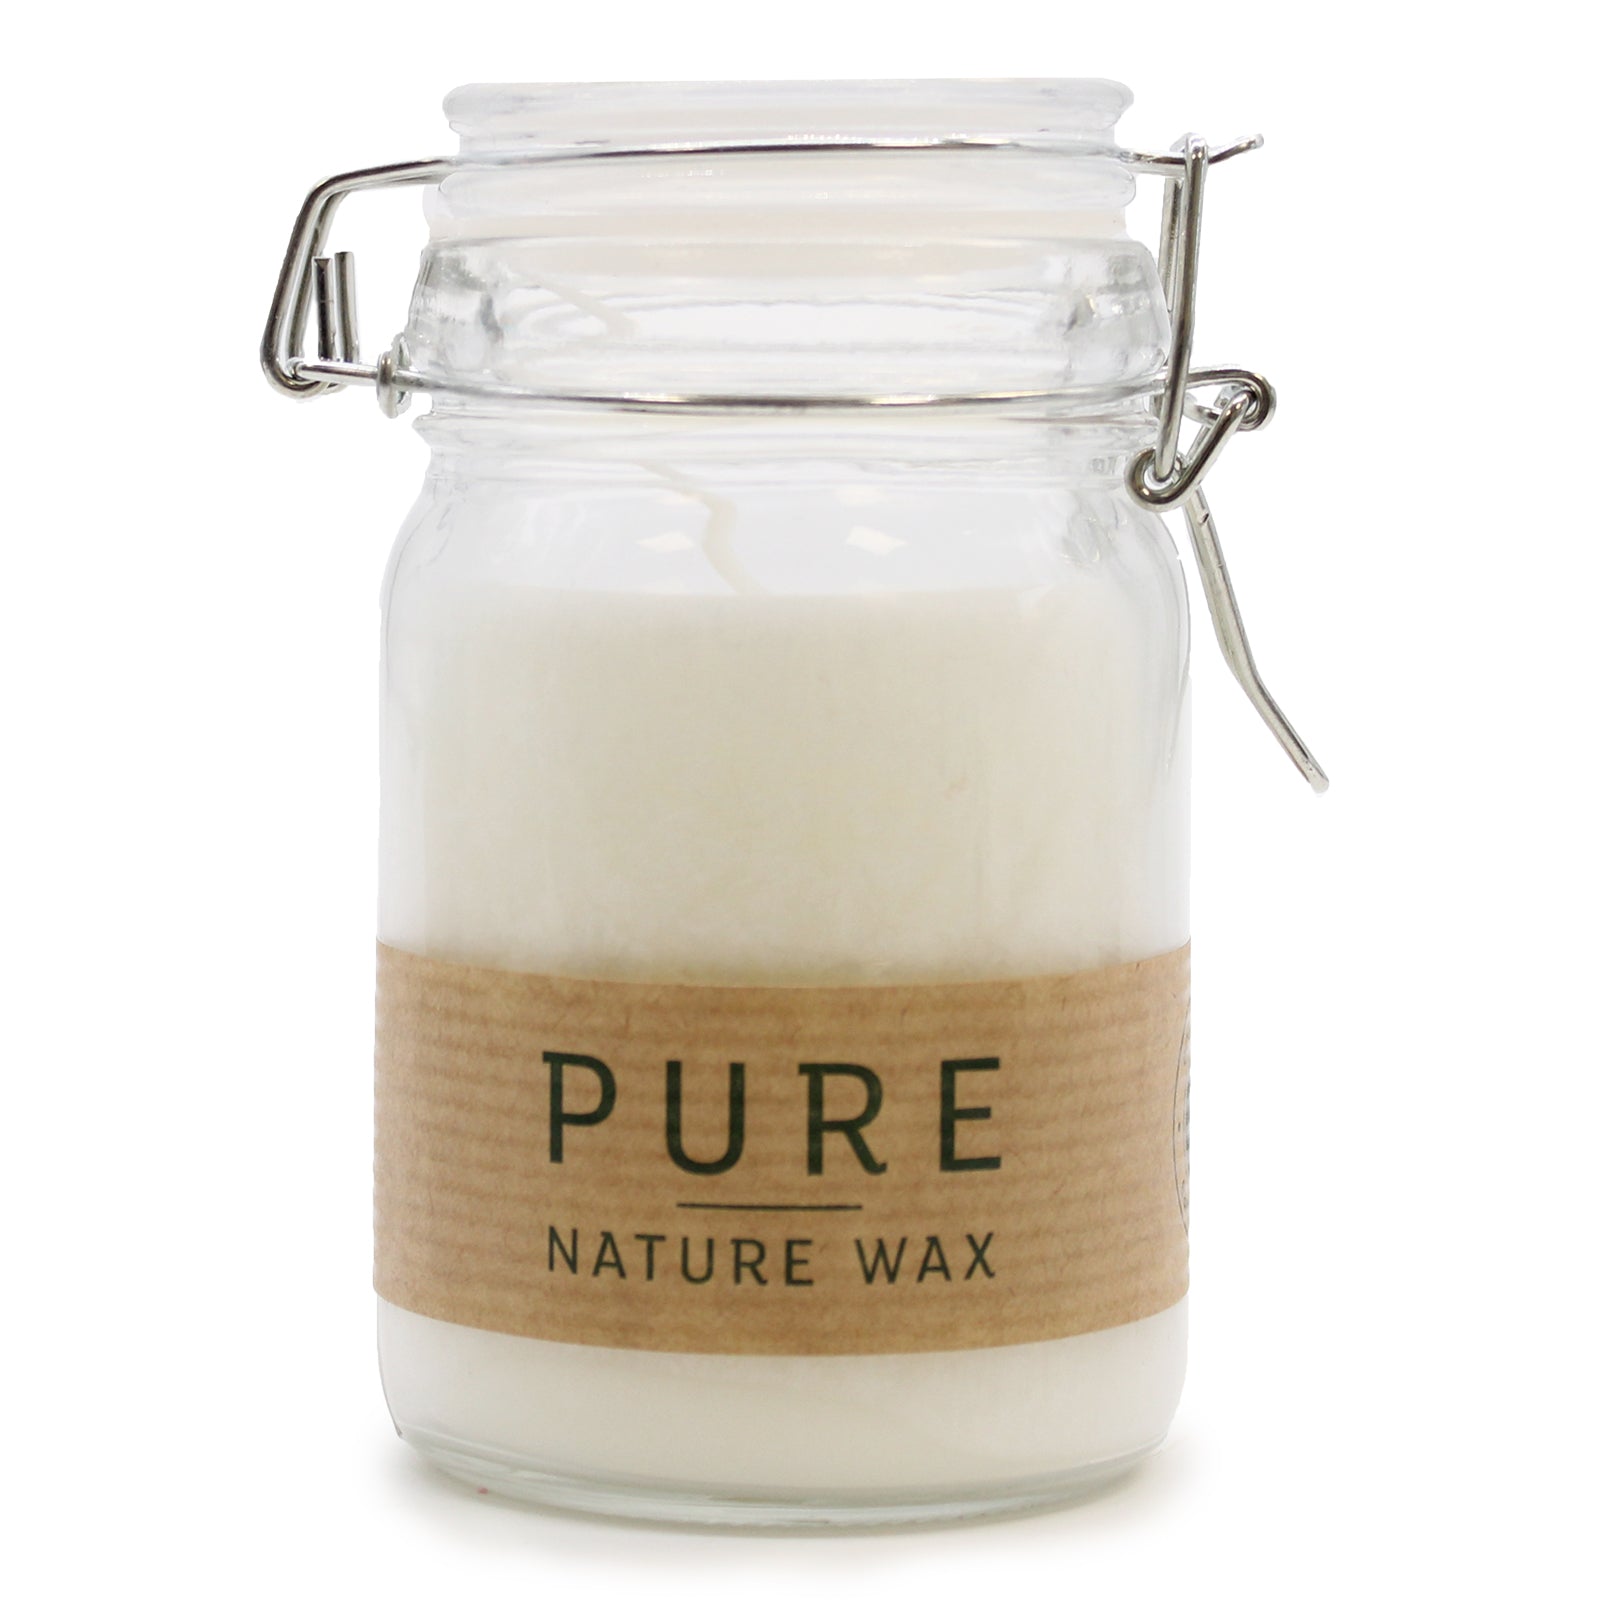 View Pure Olive Wax Jar Candle 120x70 White information